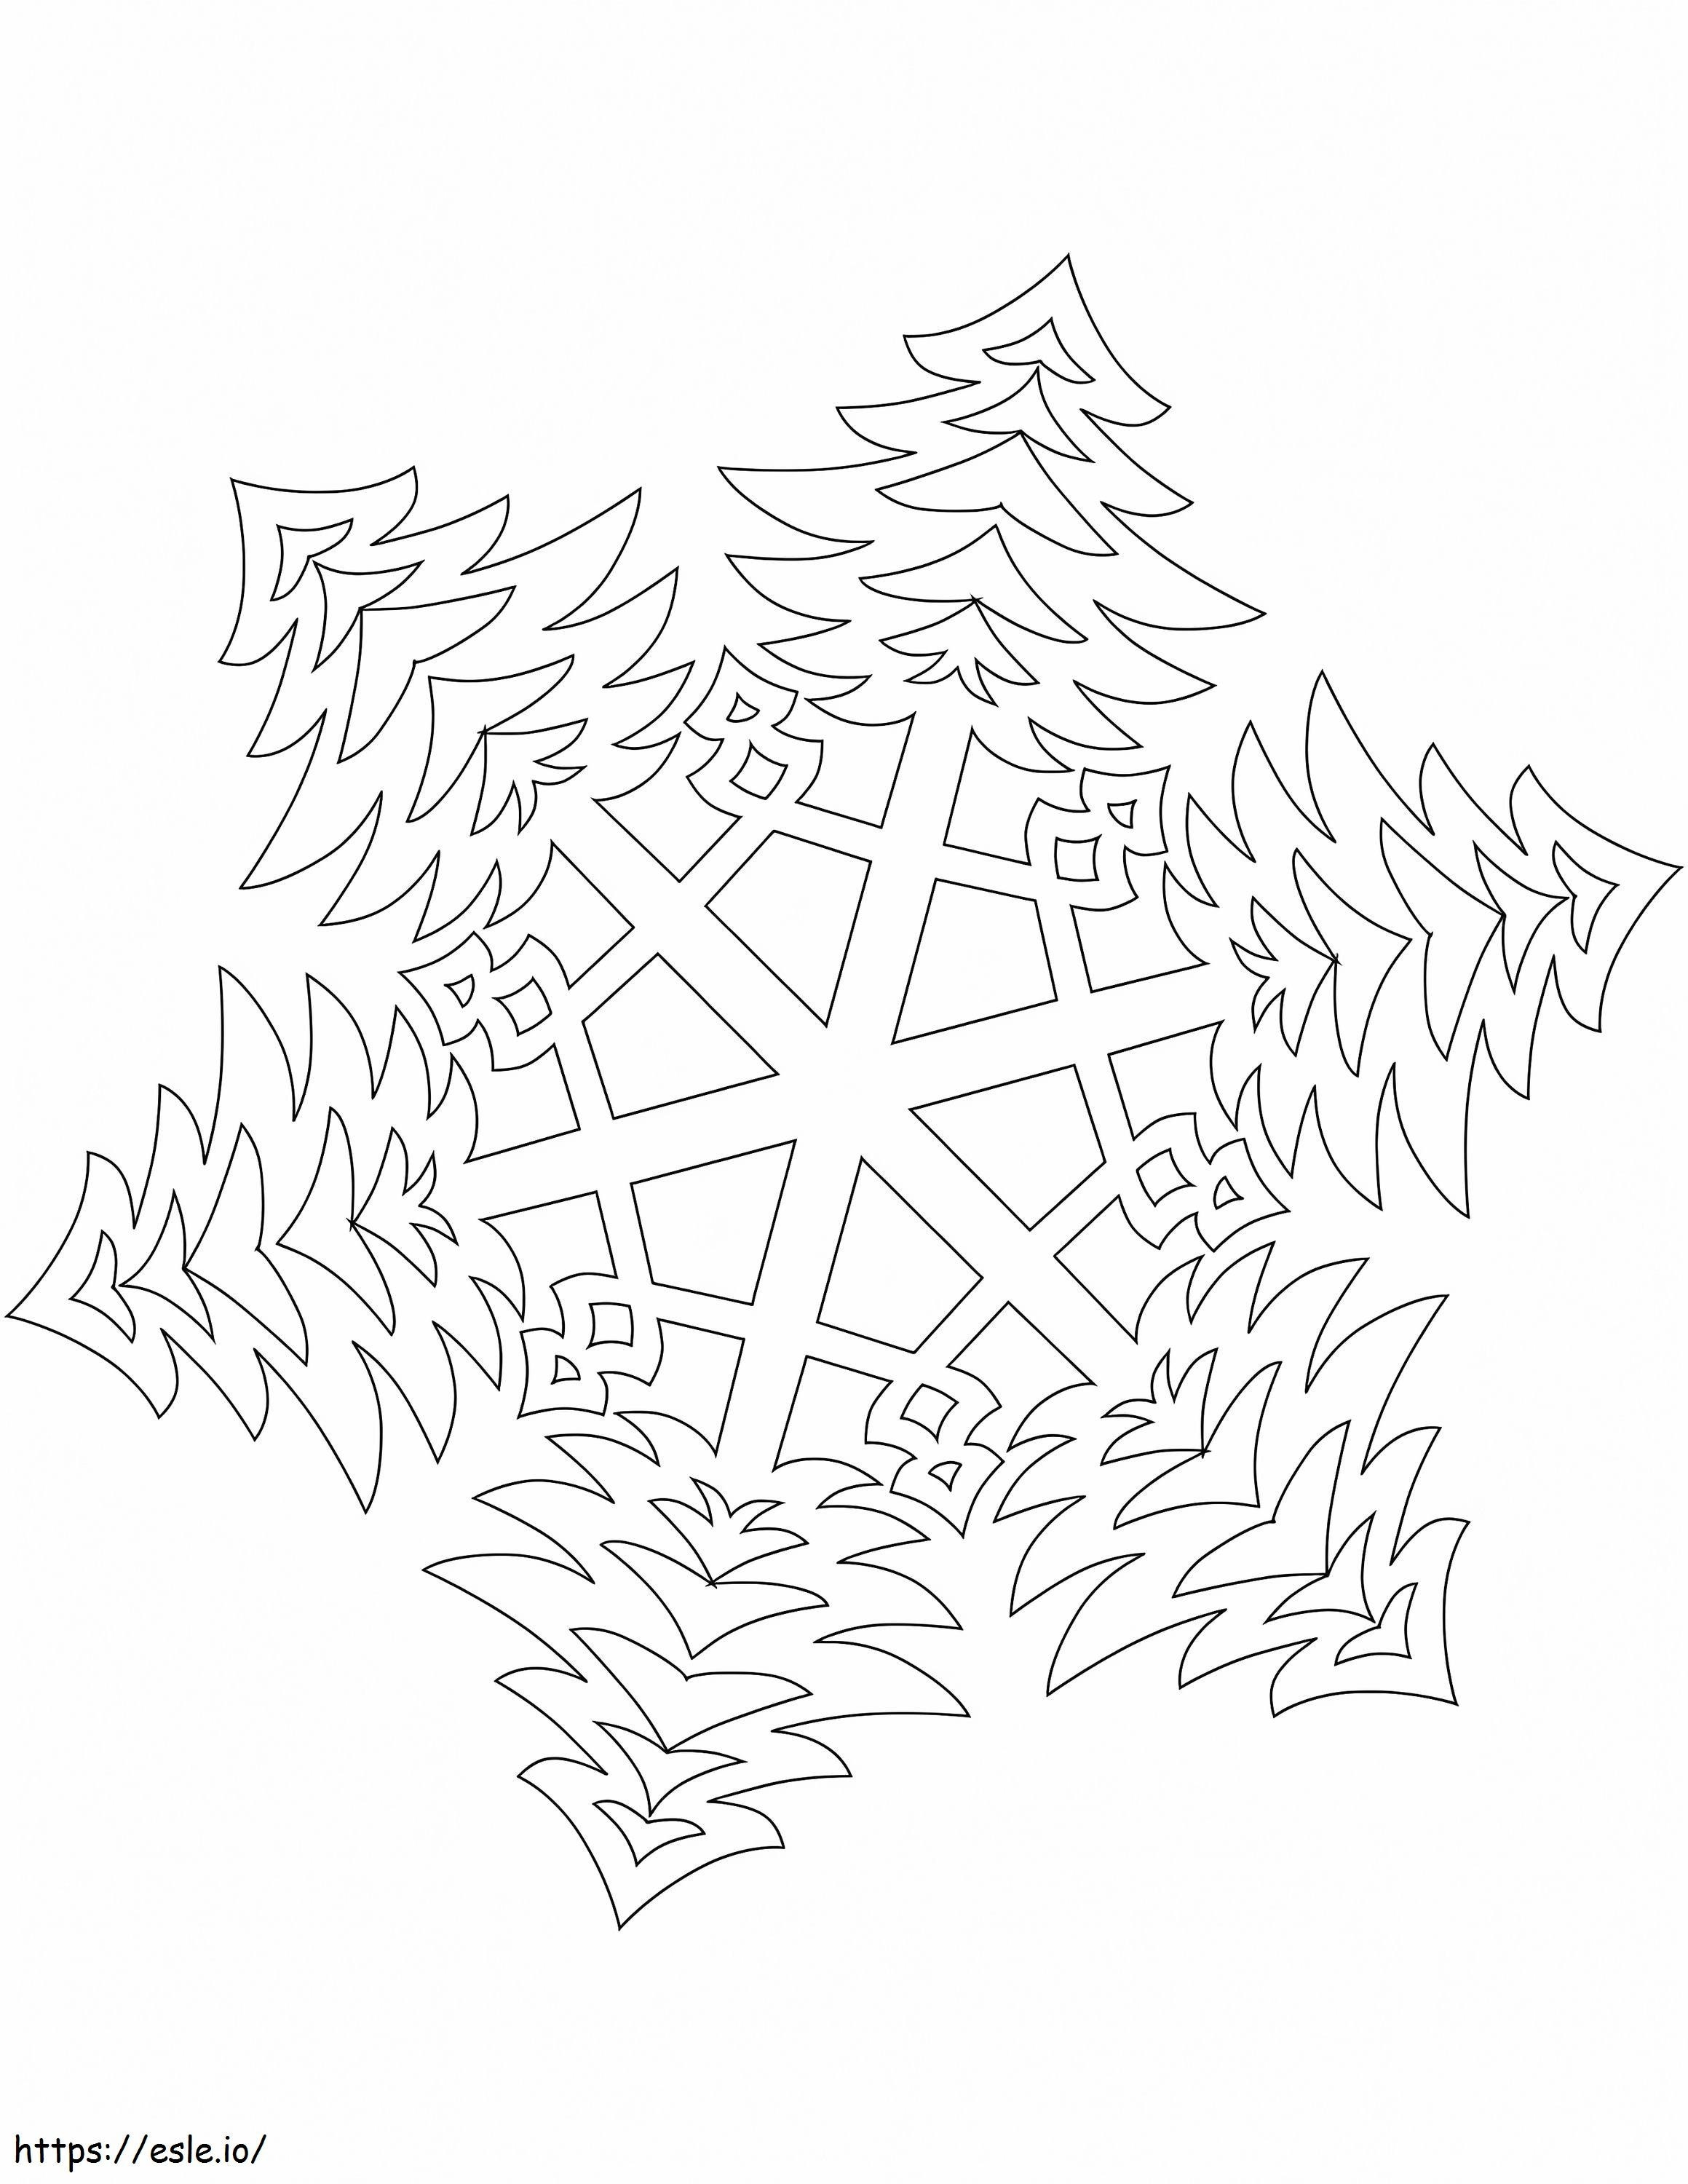 Snowflake With Bushy Christmas Trees Pattern coloring page